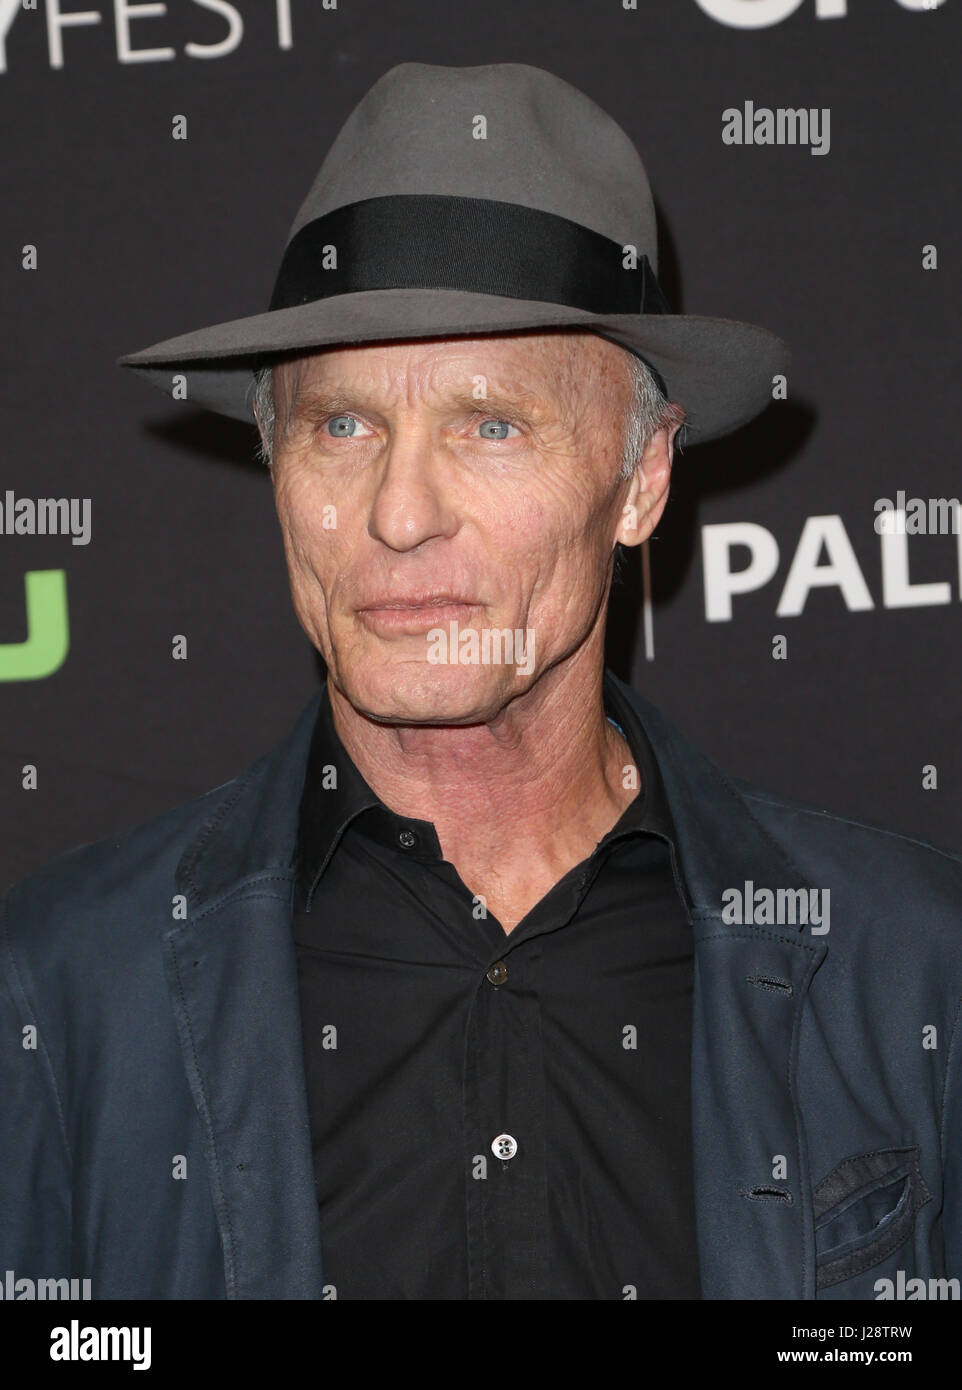 Media's 34th Annual PaleyFest Los Angeles: 'Westworld' at The Paley Center - Arrivals Featuring: Ed Harris Where: Hollywood, California, United States When: 25 Mar 2017 Stock Photo